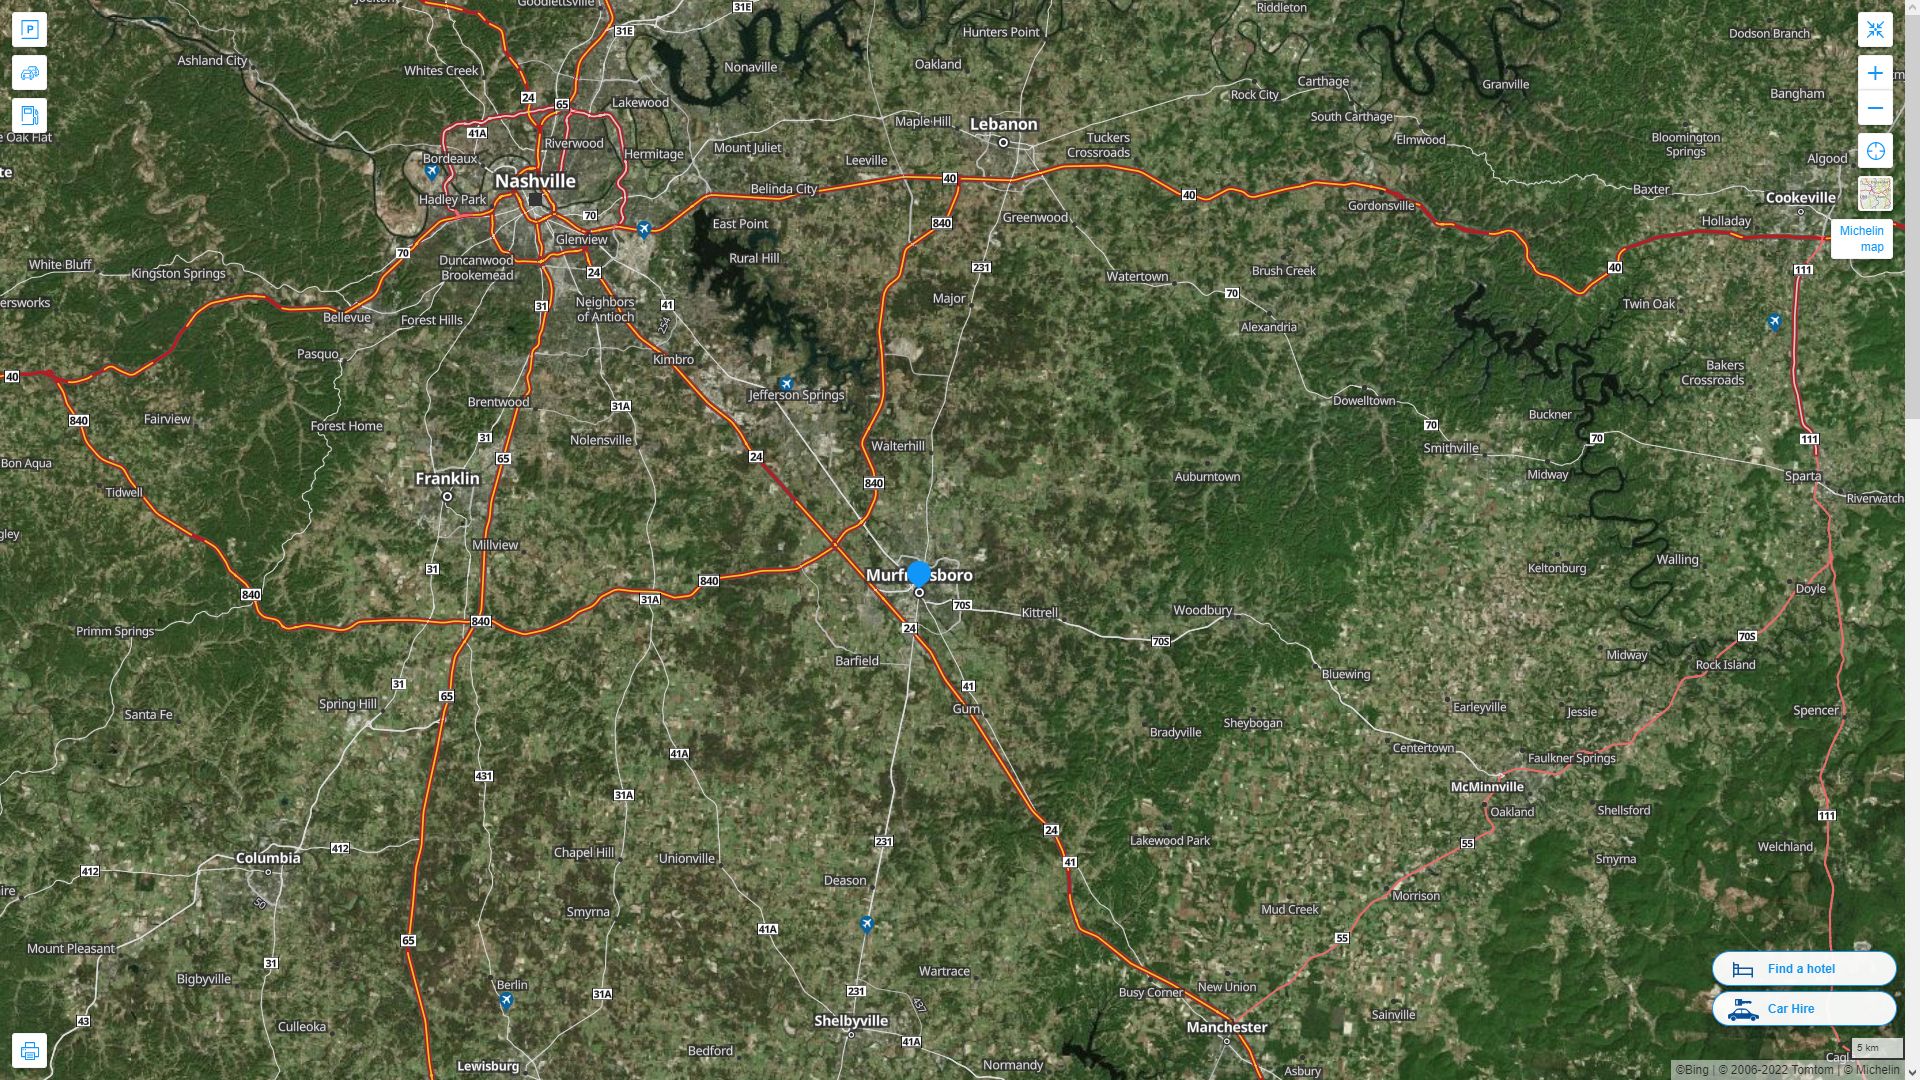 Murfreesboro Tennessee Highway and Road Map with Satellite View